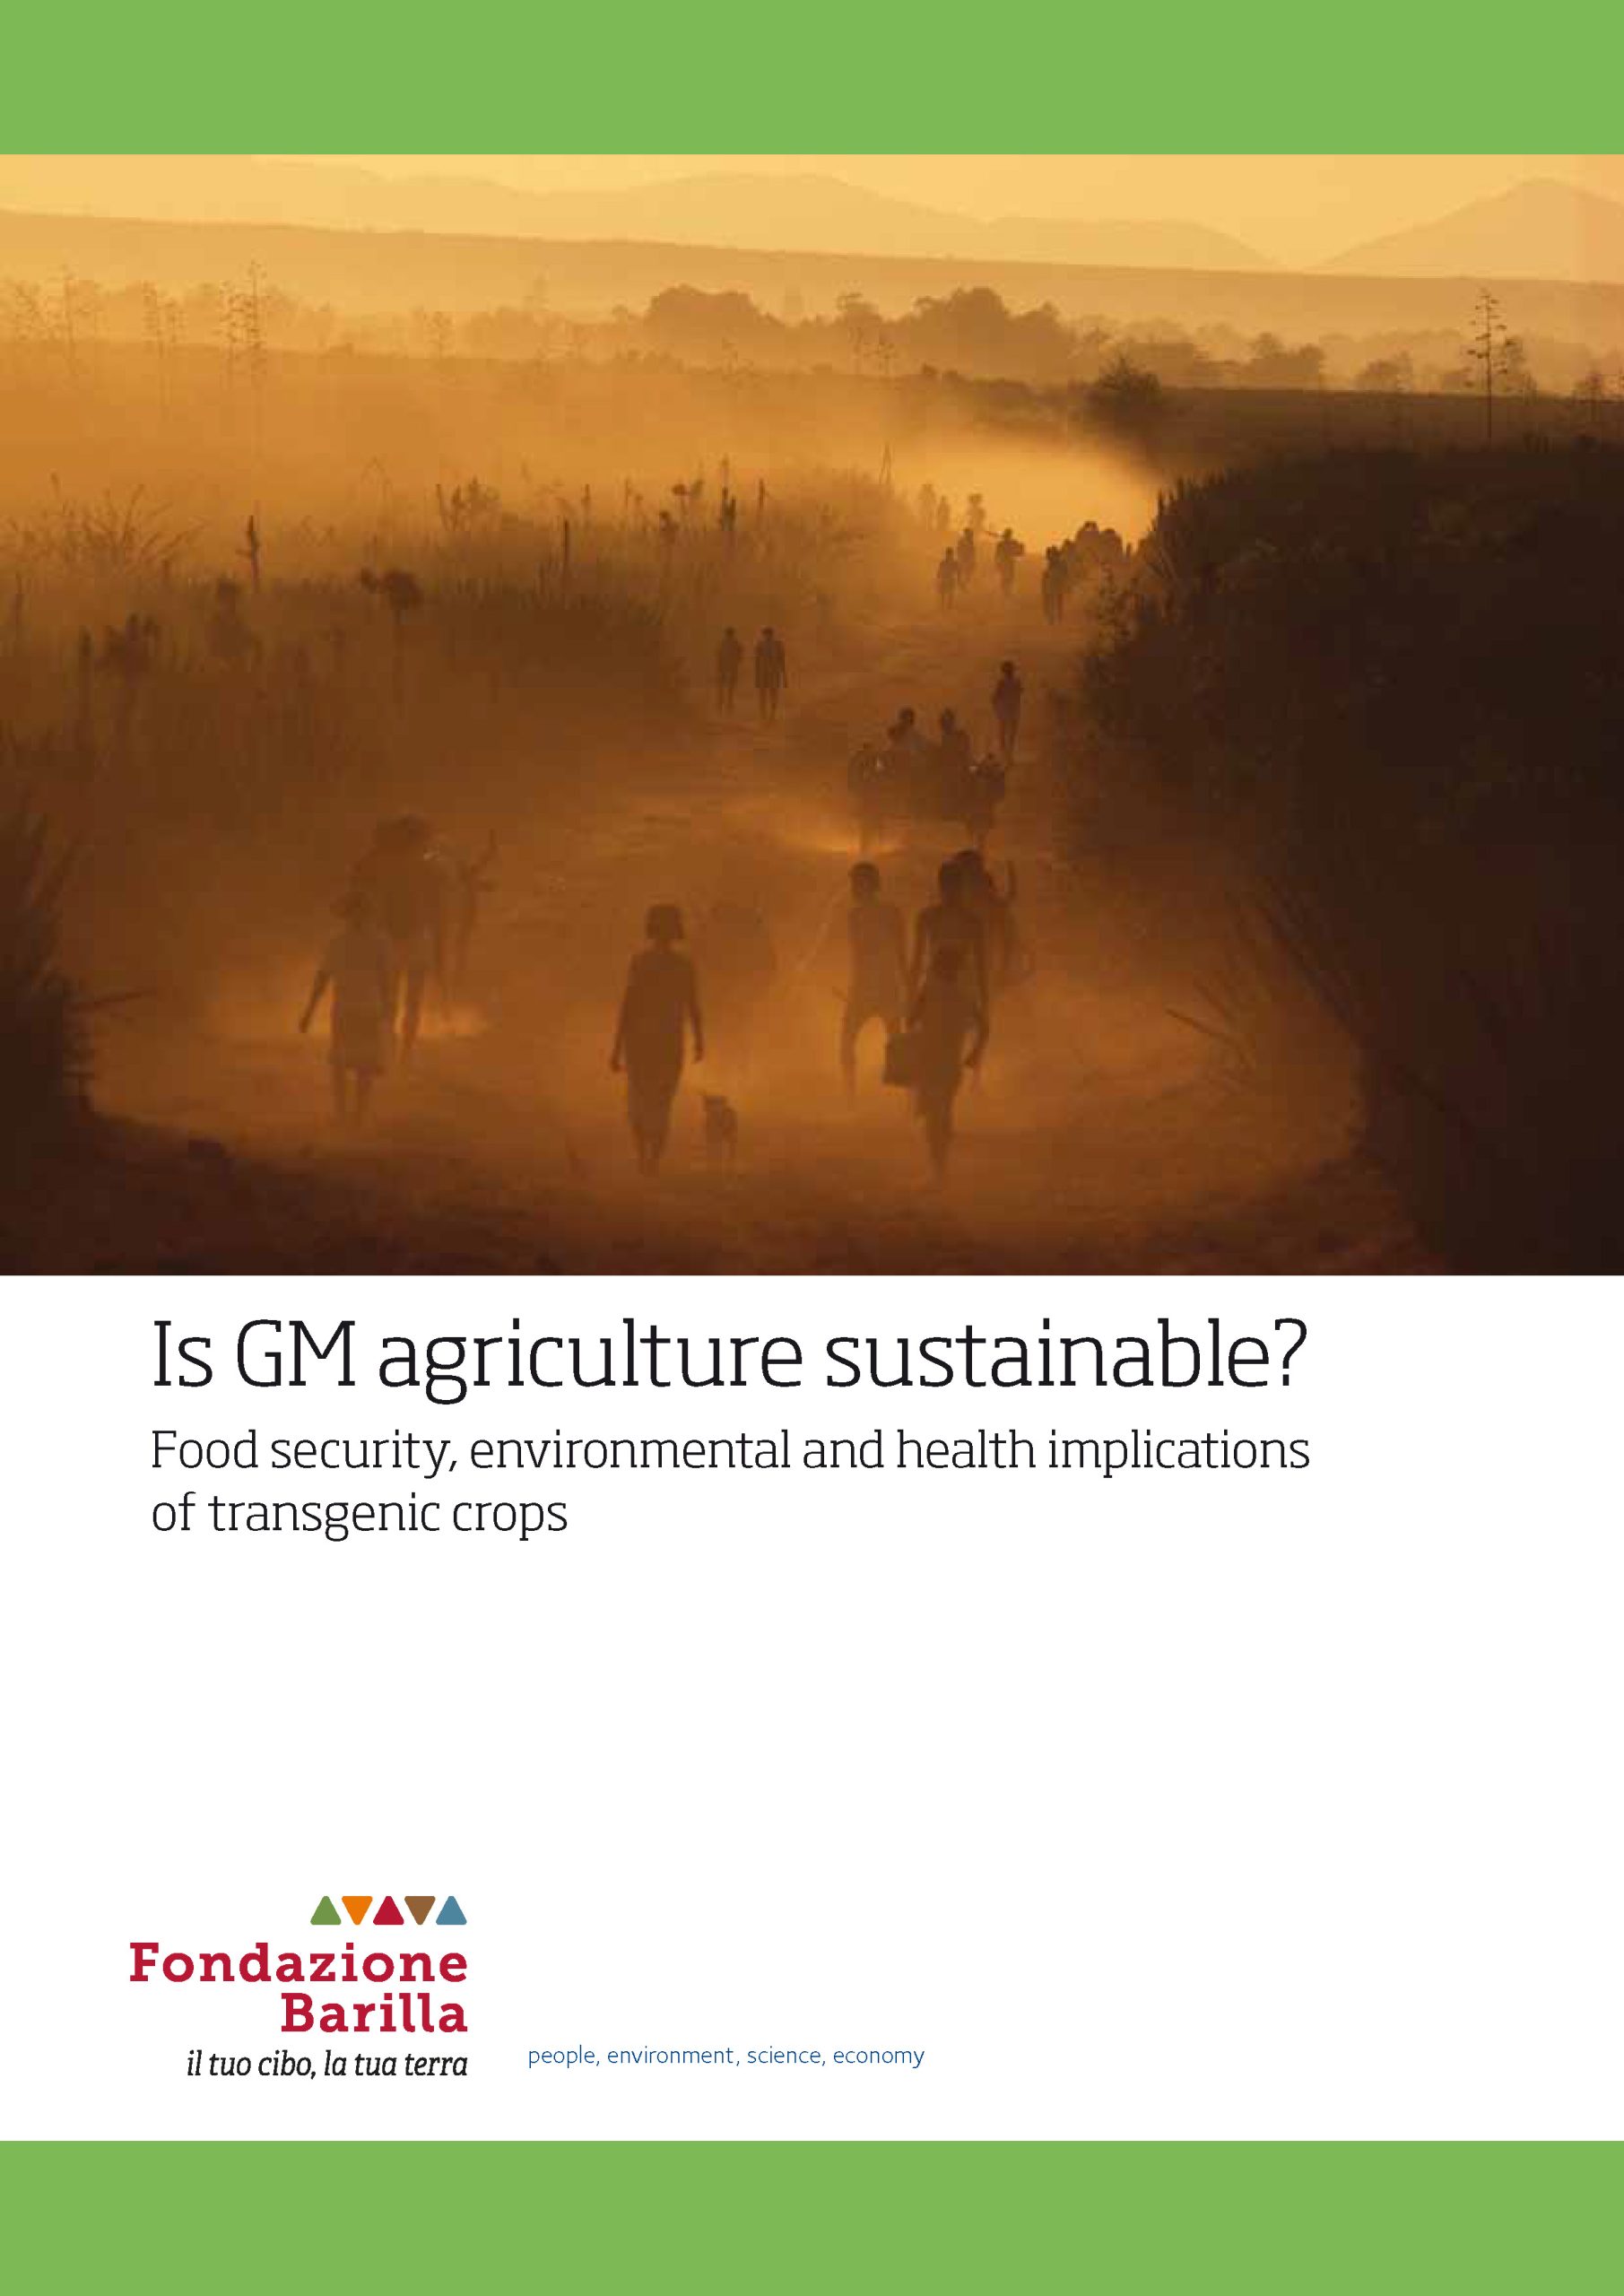 How sustainable is GMO agriculture?